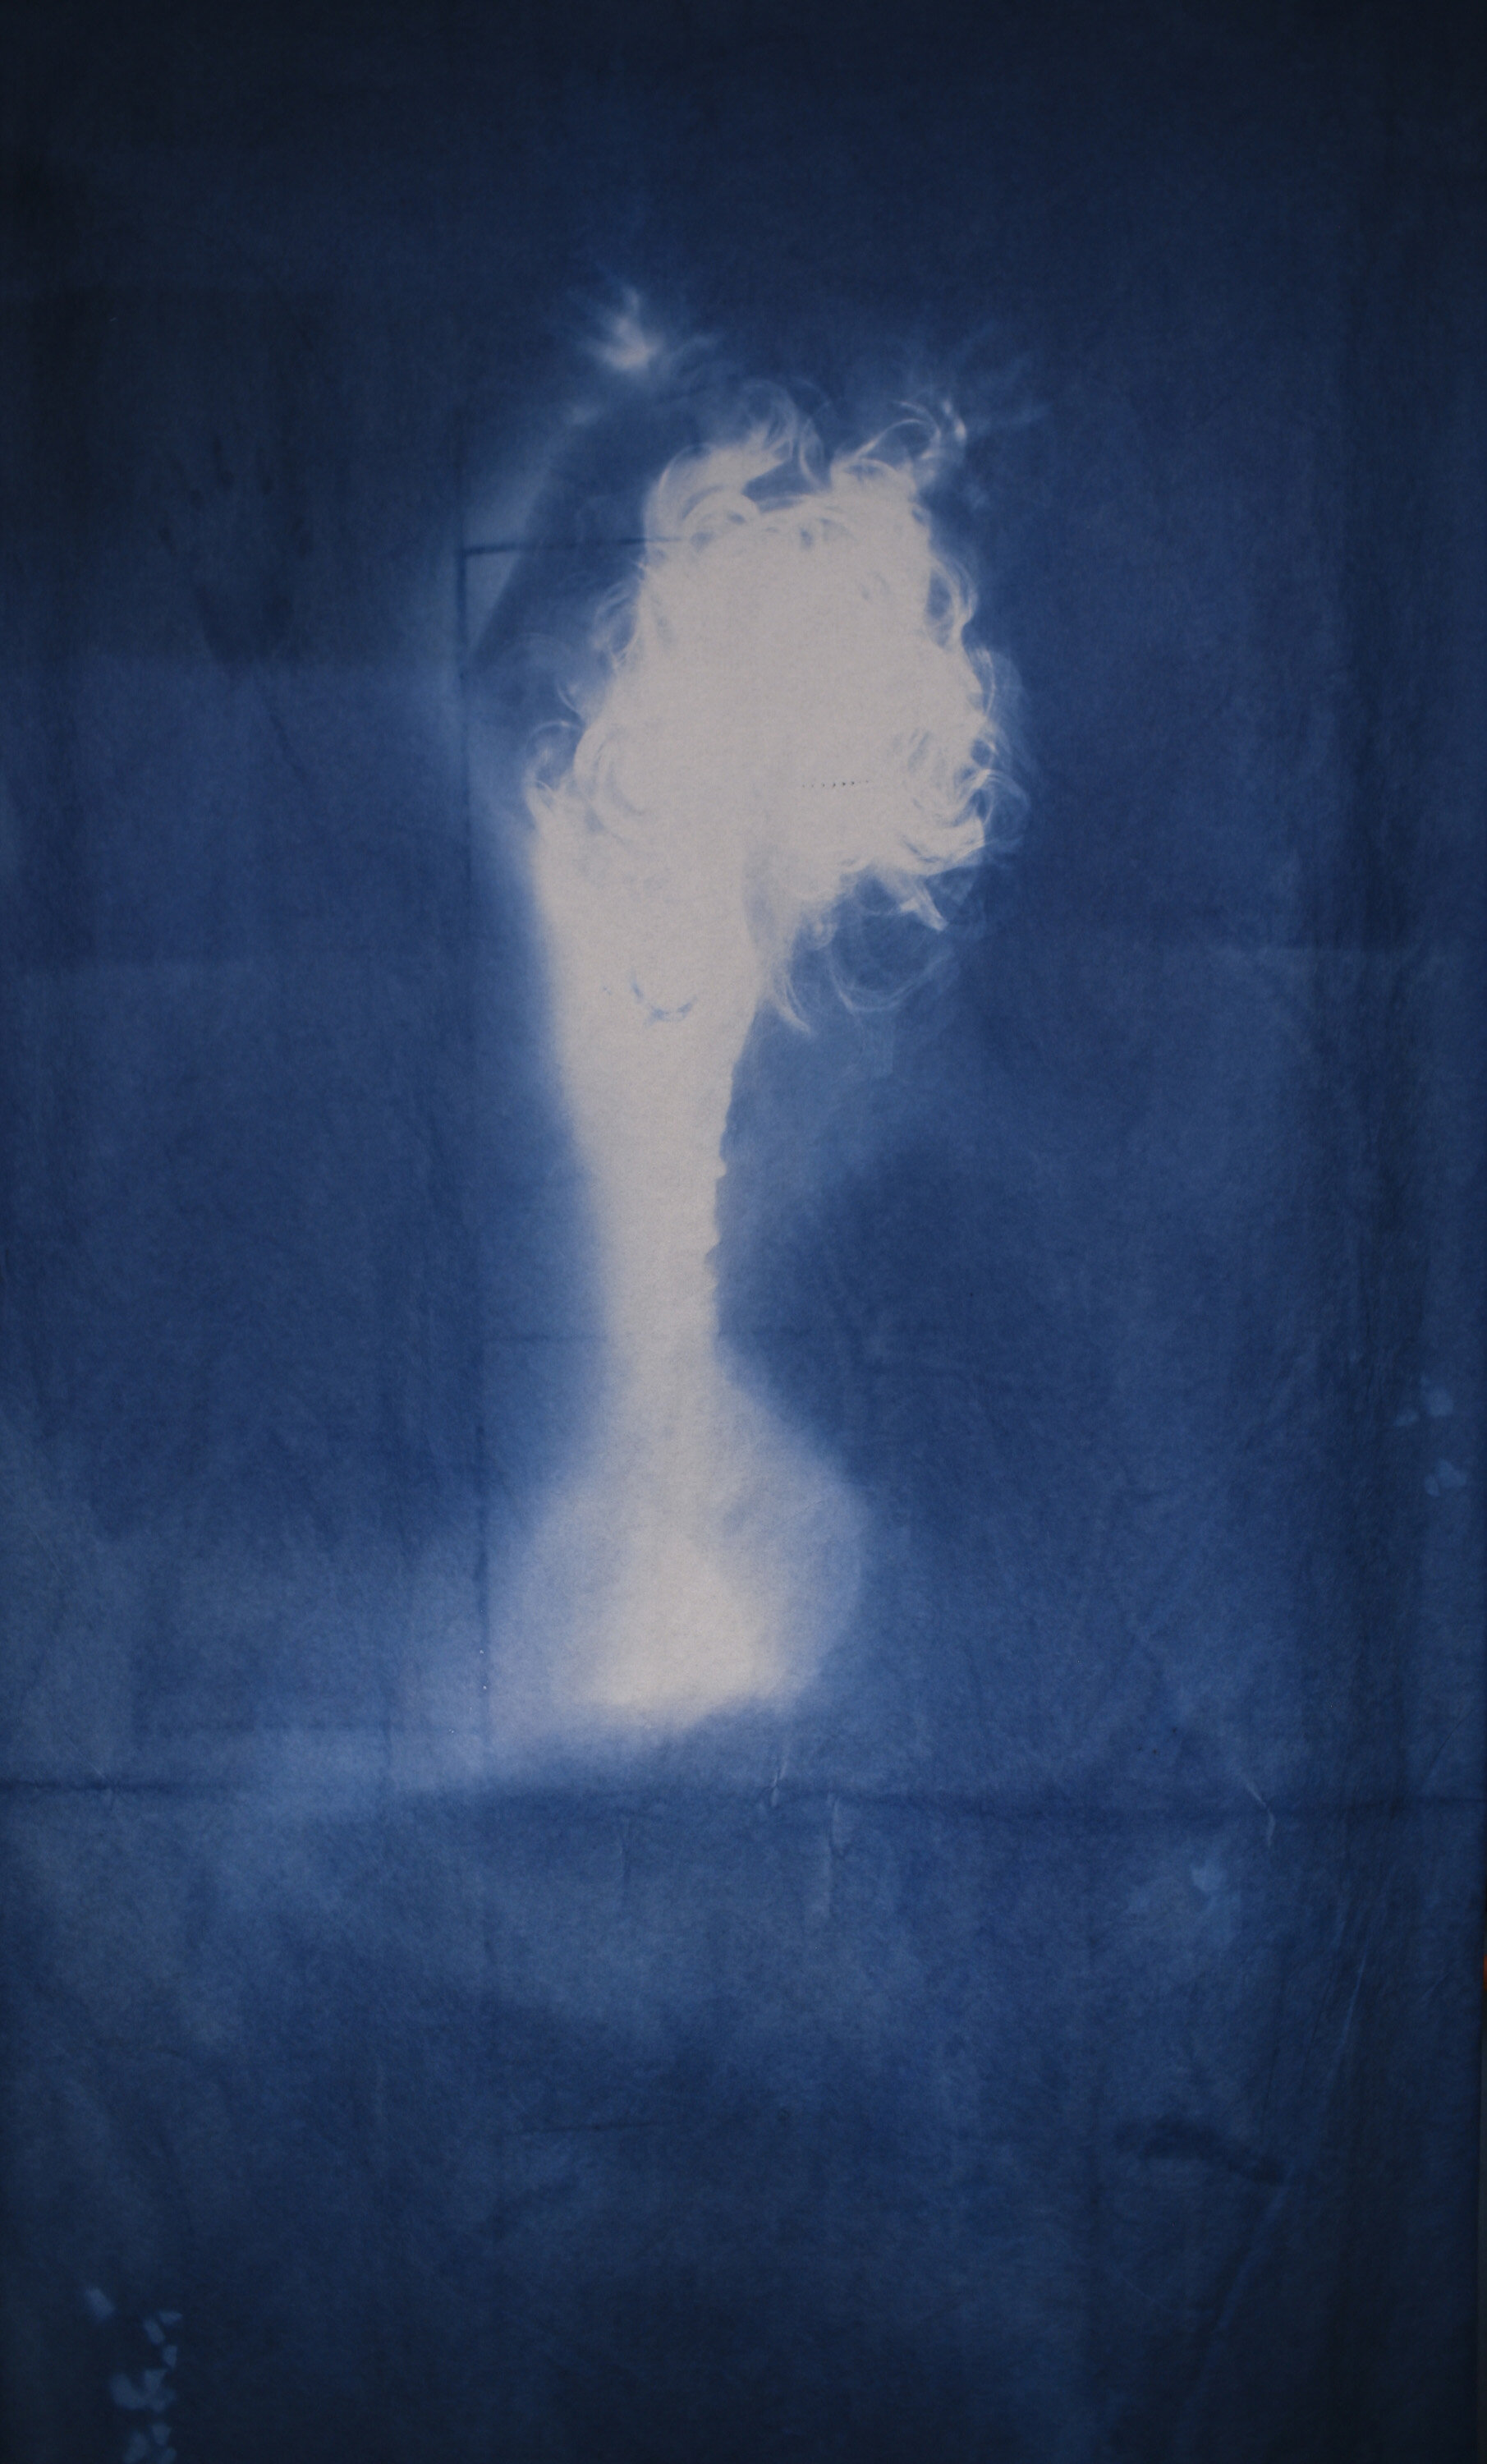  Han Qin,  Ethereal Evolving 2 , 2018. Cyanotype on paper, 82 x 47 inches ©Han Qin, courtesy Fou Gallery 